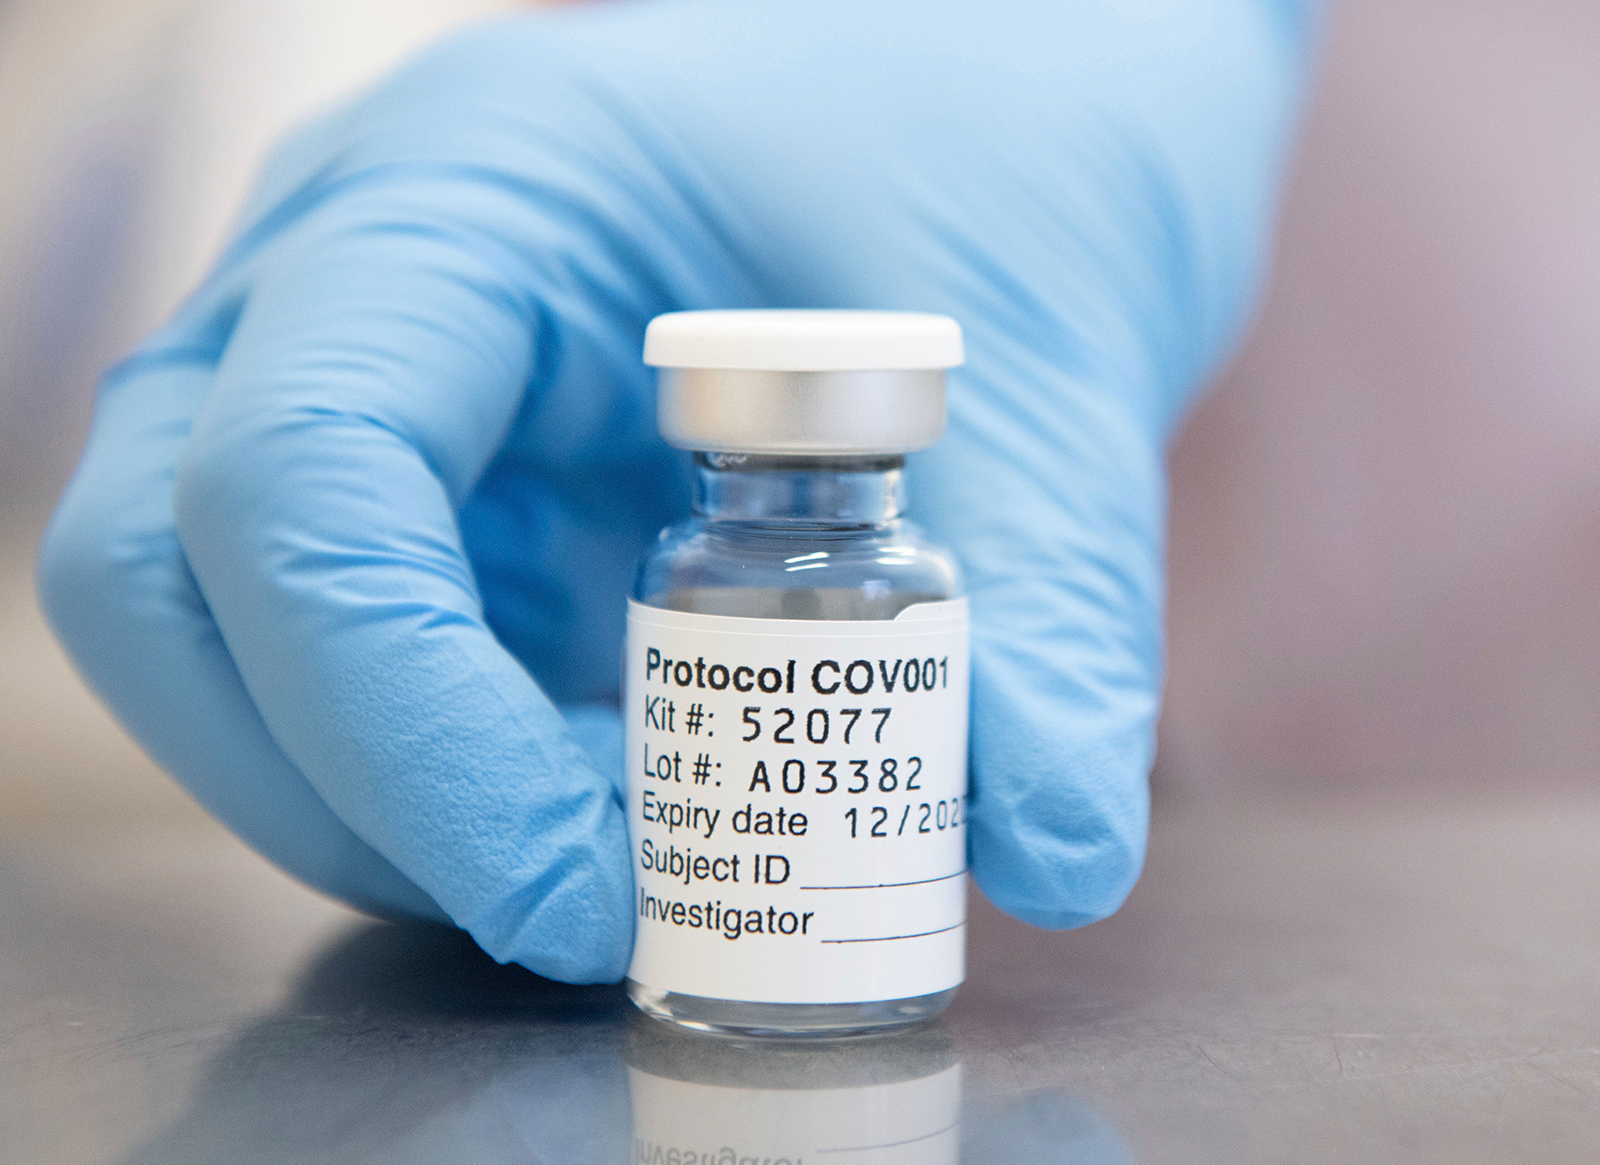 This undated file photo issued by the University of Oxford on November 23, shows a vial of coronavirus vaccine developed by AstraZeneca and Oxford University, in Oxford, England. 